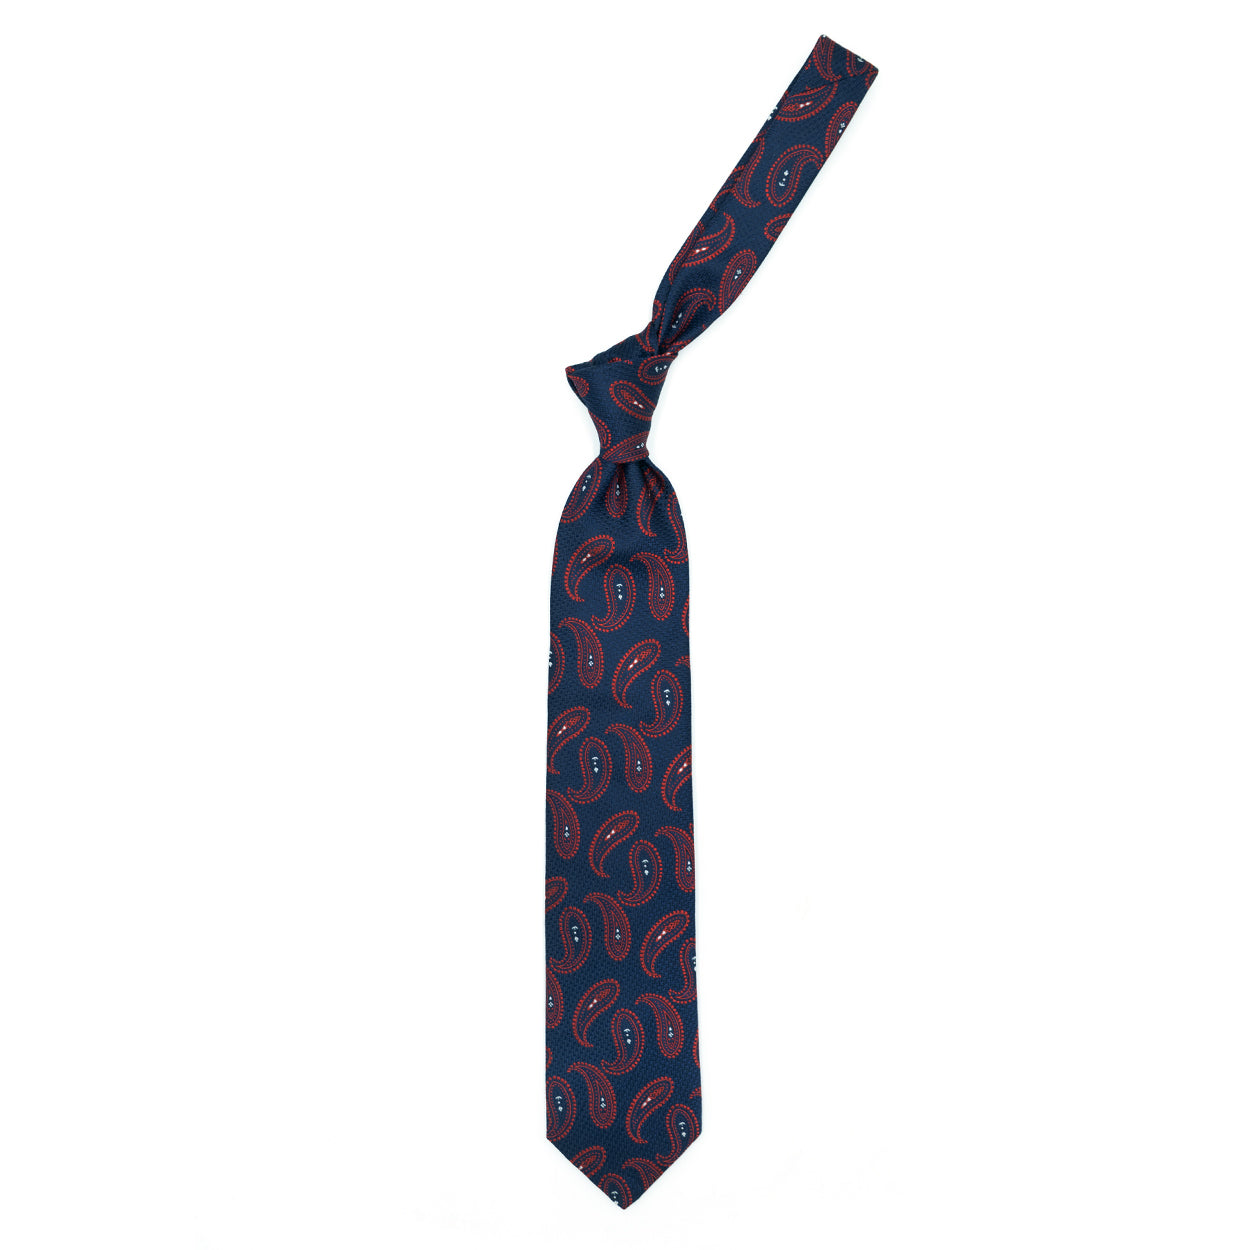 Blue tie with red paisleys